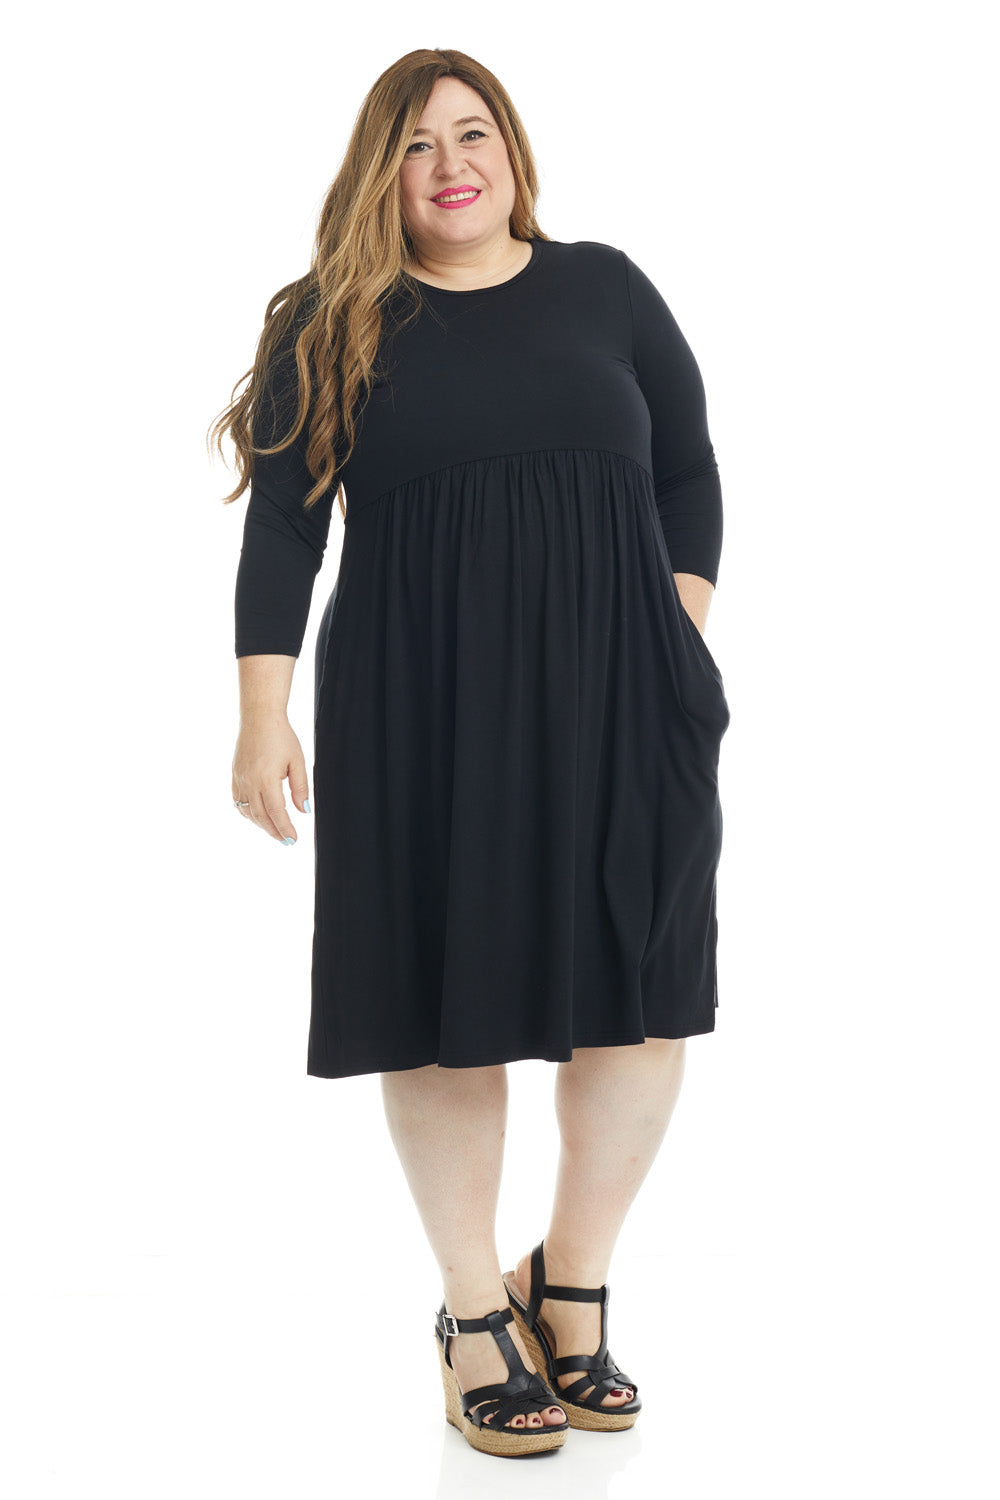 black modest 3/4 sleeve below the knee plus size swing dress with pockets